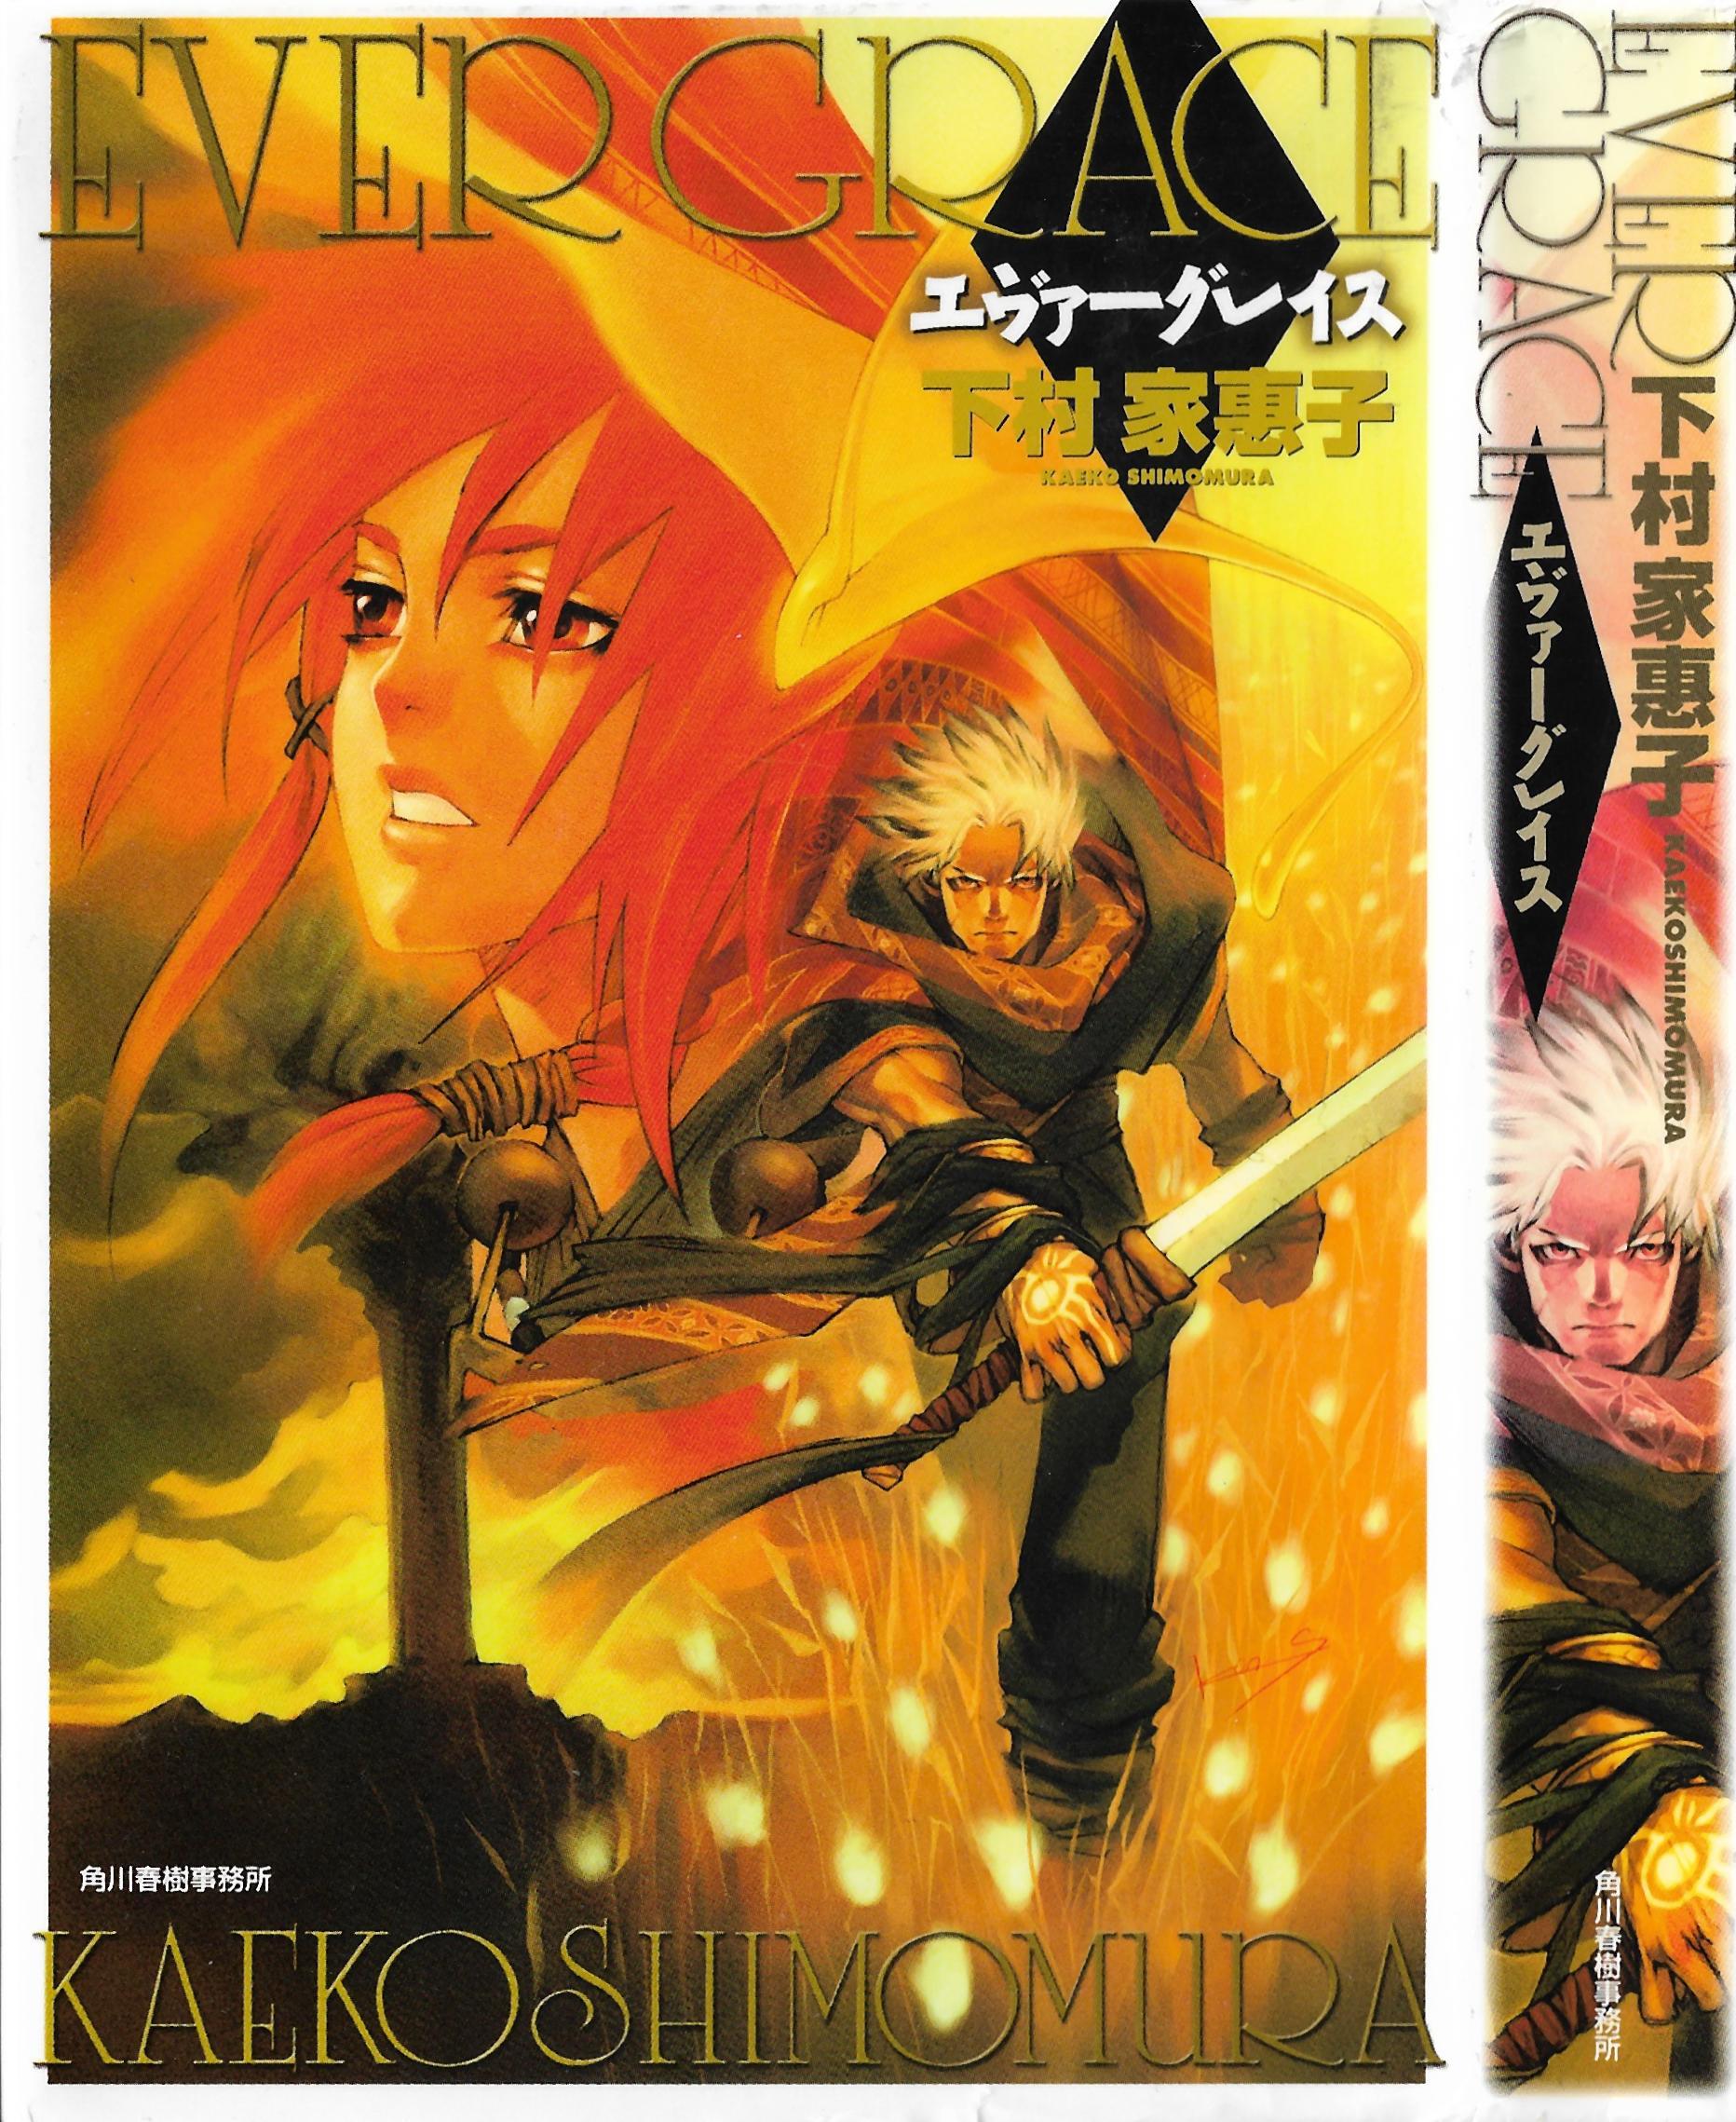 evergrace novel cover and spine. darius advancing on a grassy yellow field while he wields a sword with his crest-branded hand. a bust shot of sharline is superimposed on the background, looking up to the left. the text translates to evergrace, by kaeko shimomura. kadokawa's copyright is on the bottom left. the spine of the book shows the same illustration of darius but cropped.